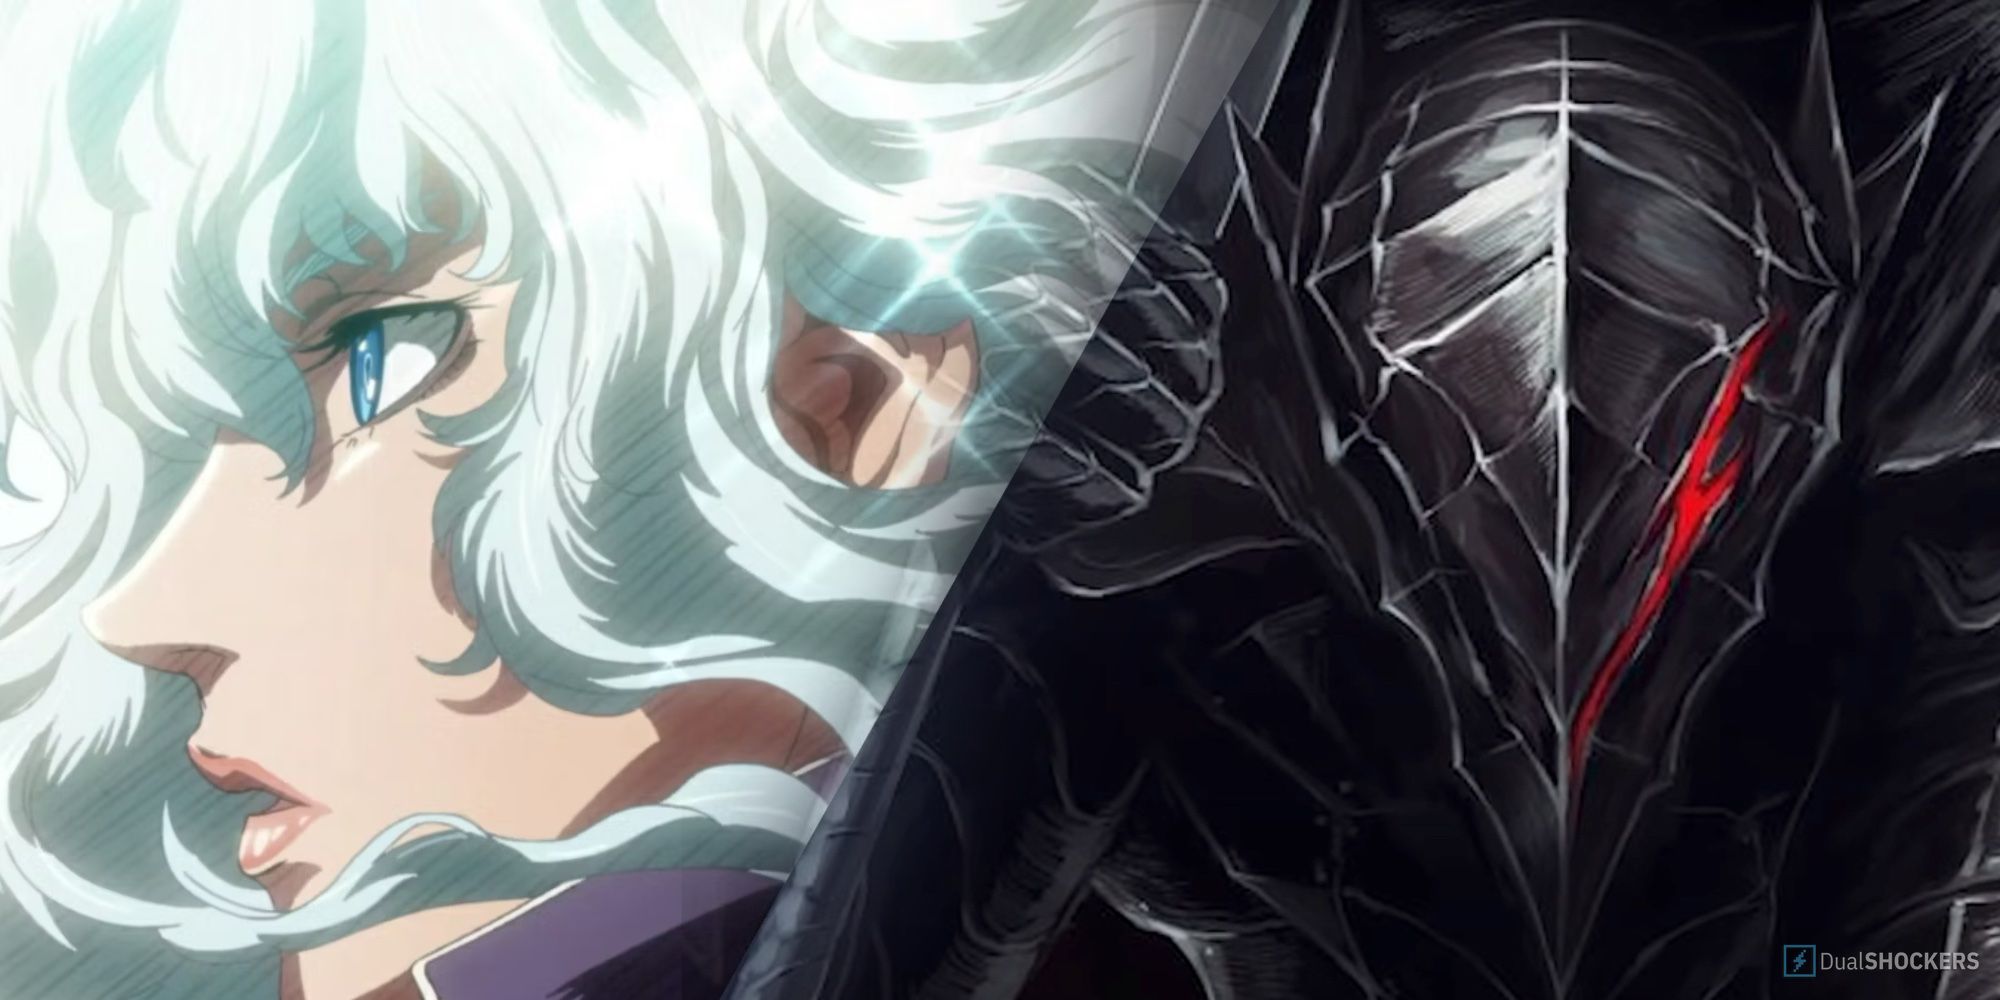 Strongest Characters in berserk, griffith and guts